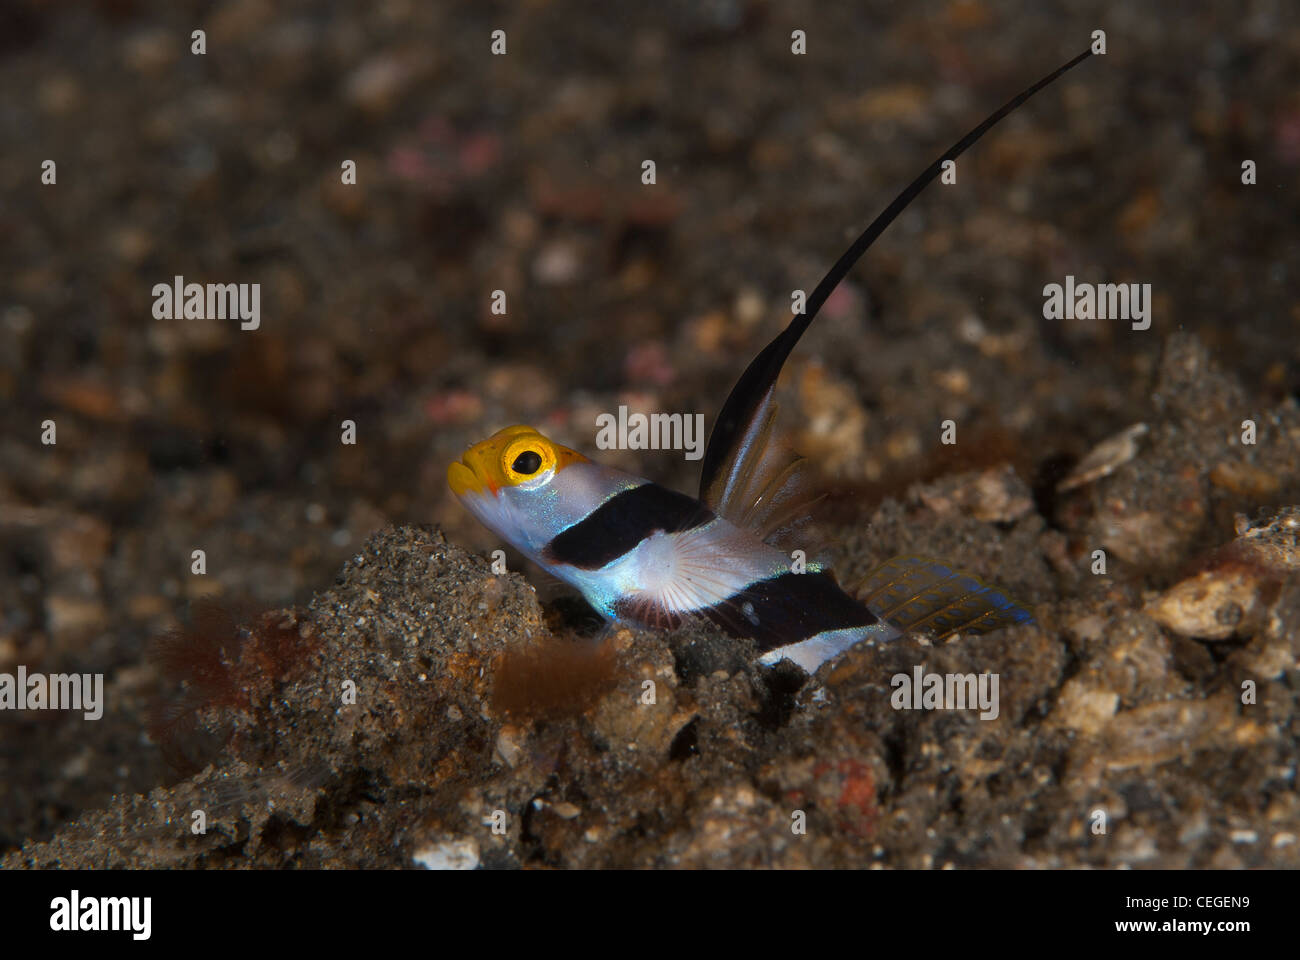 A Black Rayed Shrimp Goby checks the surroundings around its burrow. Taken In Lembeh Strait North Sulawesi Indonesia Stock Photo